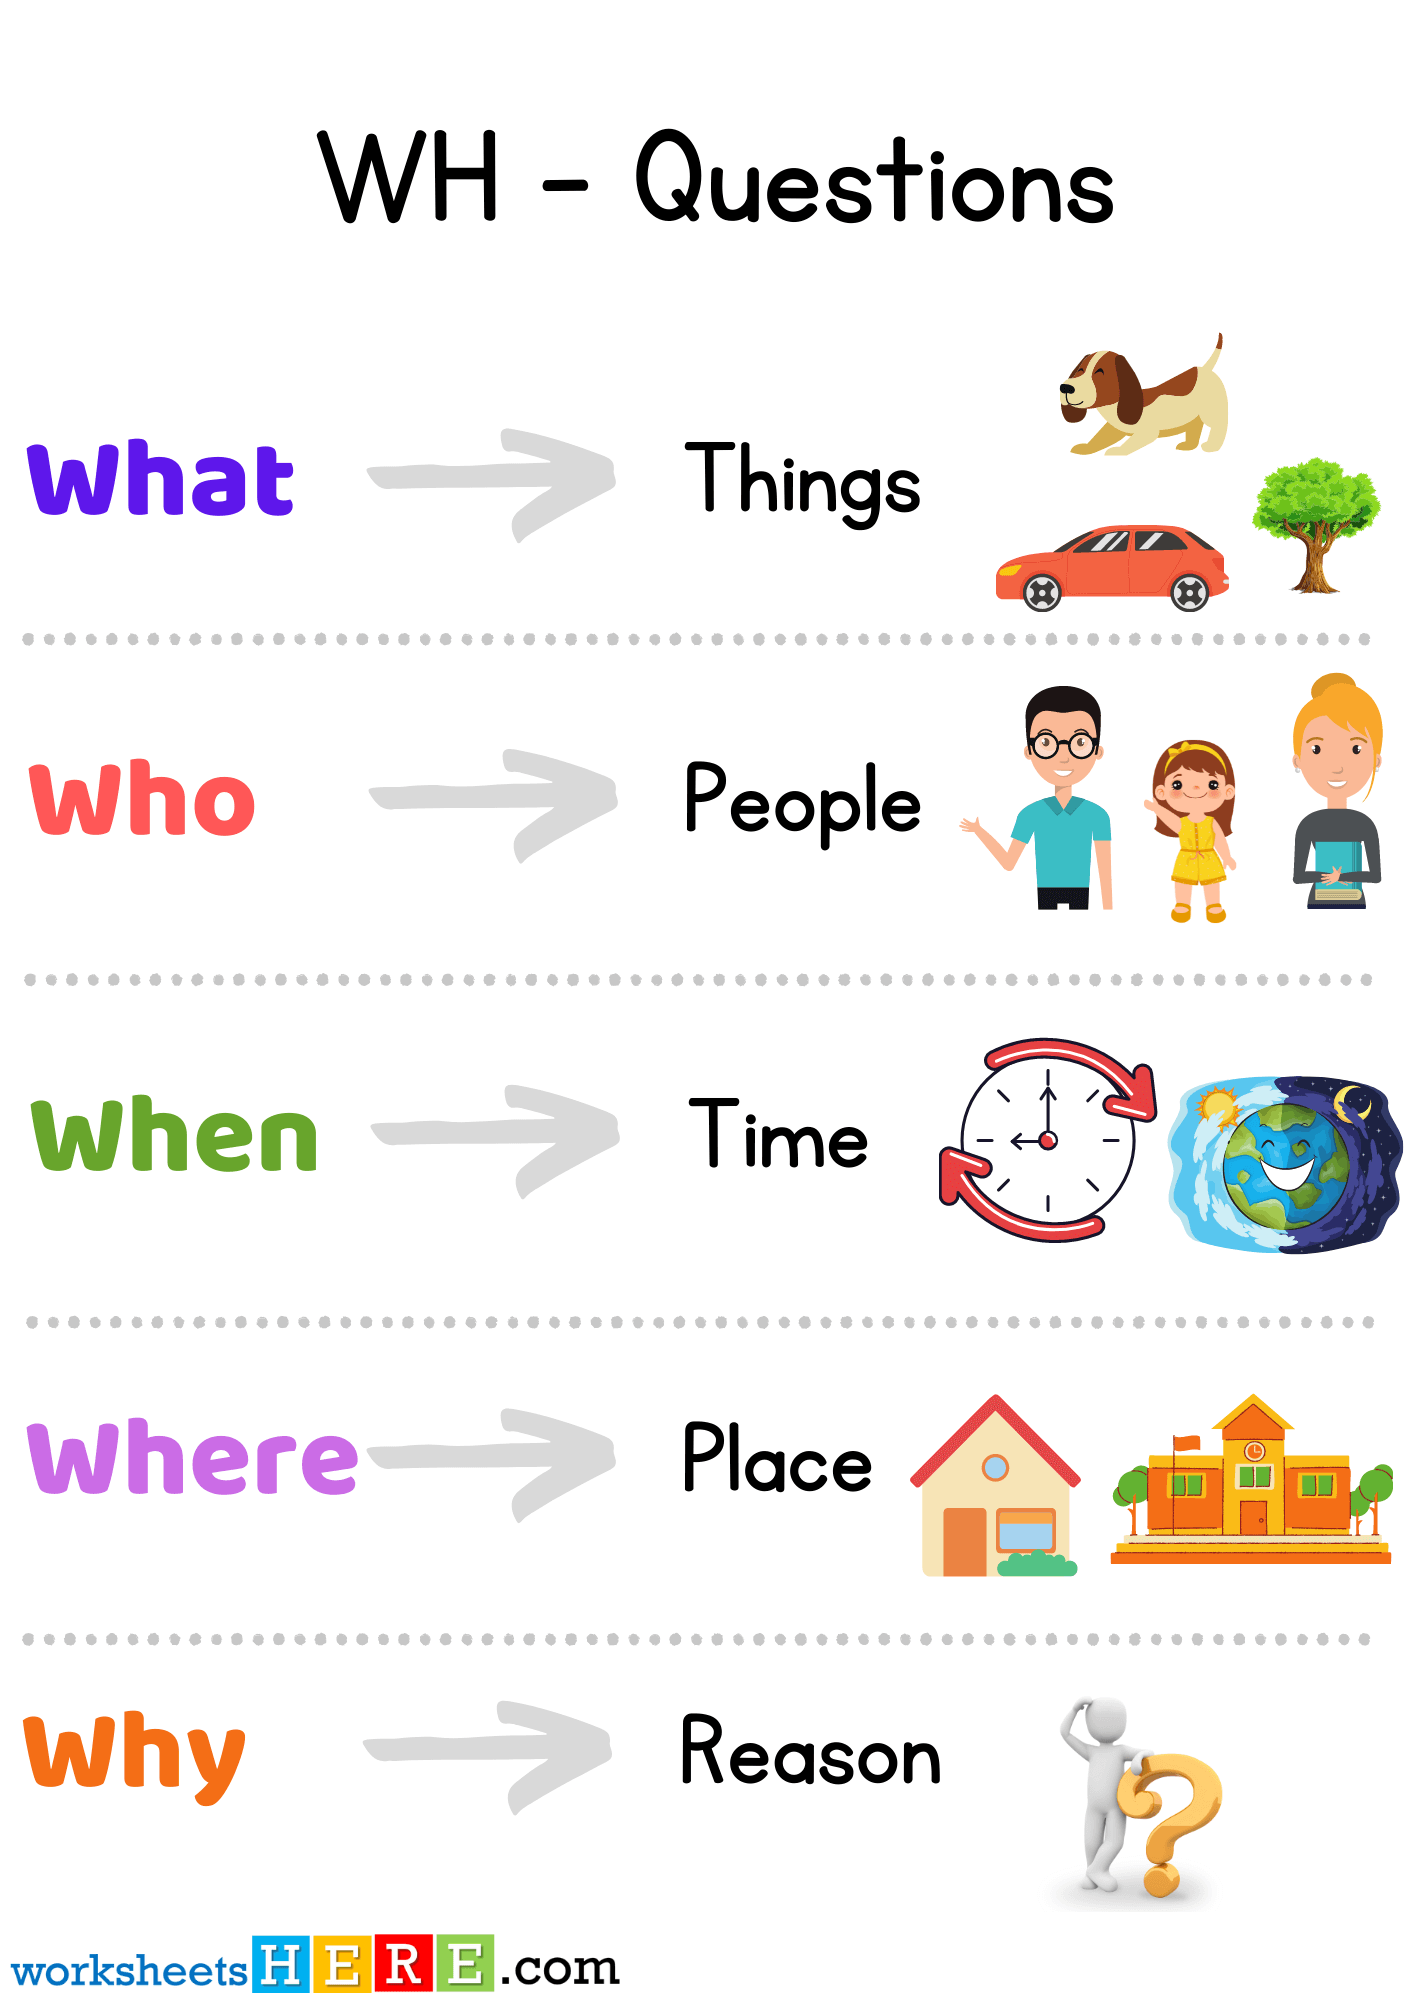 WH Questions Examples with Pictures, Who, When, What, Why, Where